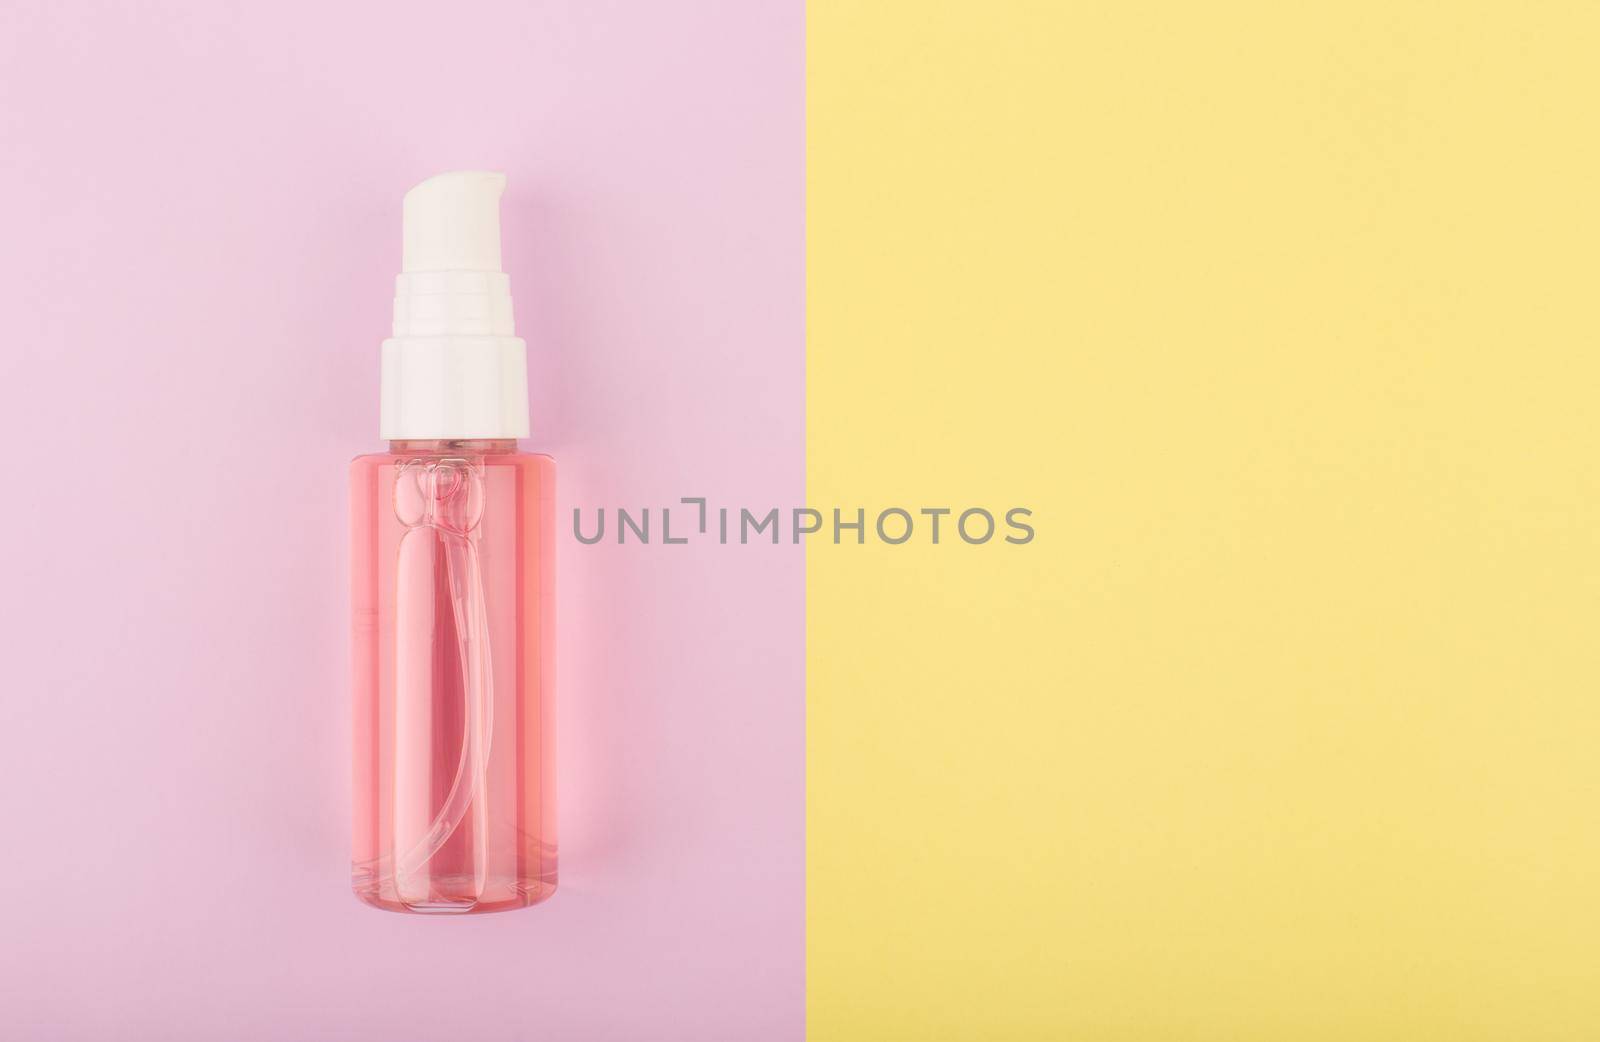 Foam or gel for skin cleaning and exfoliating in transparent tube with dispenser on pink and yellow background with copy space. Concept of skin care products for every day use